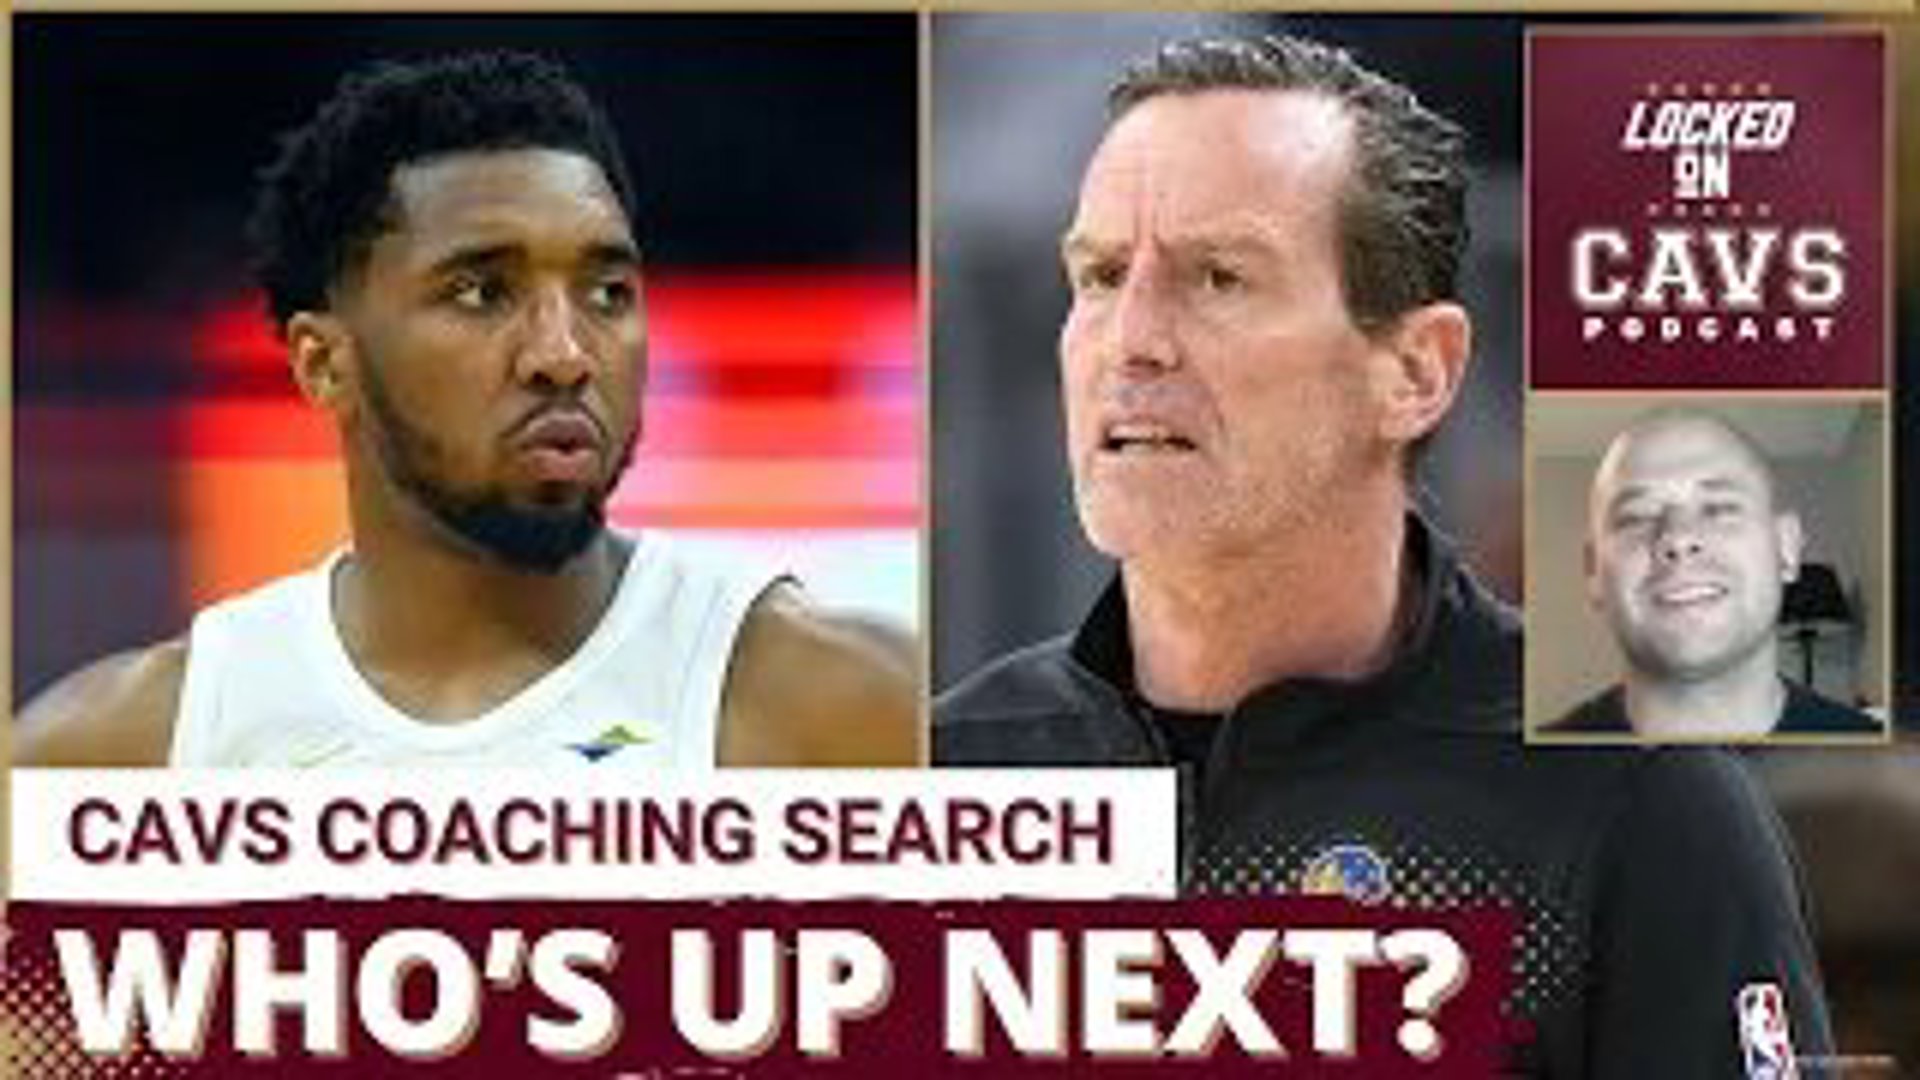 The Cleveland Cavaliers are looking for their new head coach to lead Evan Mobley, Jarrett Allen, and possibly Donovan Mitchell & Darius Garland.